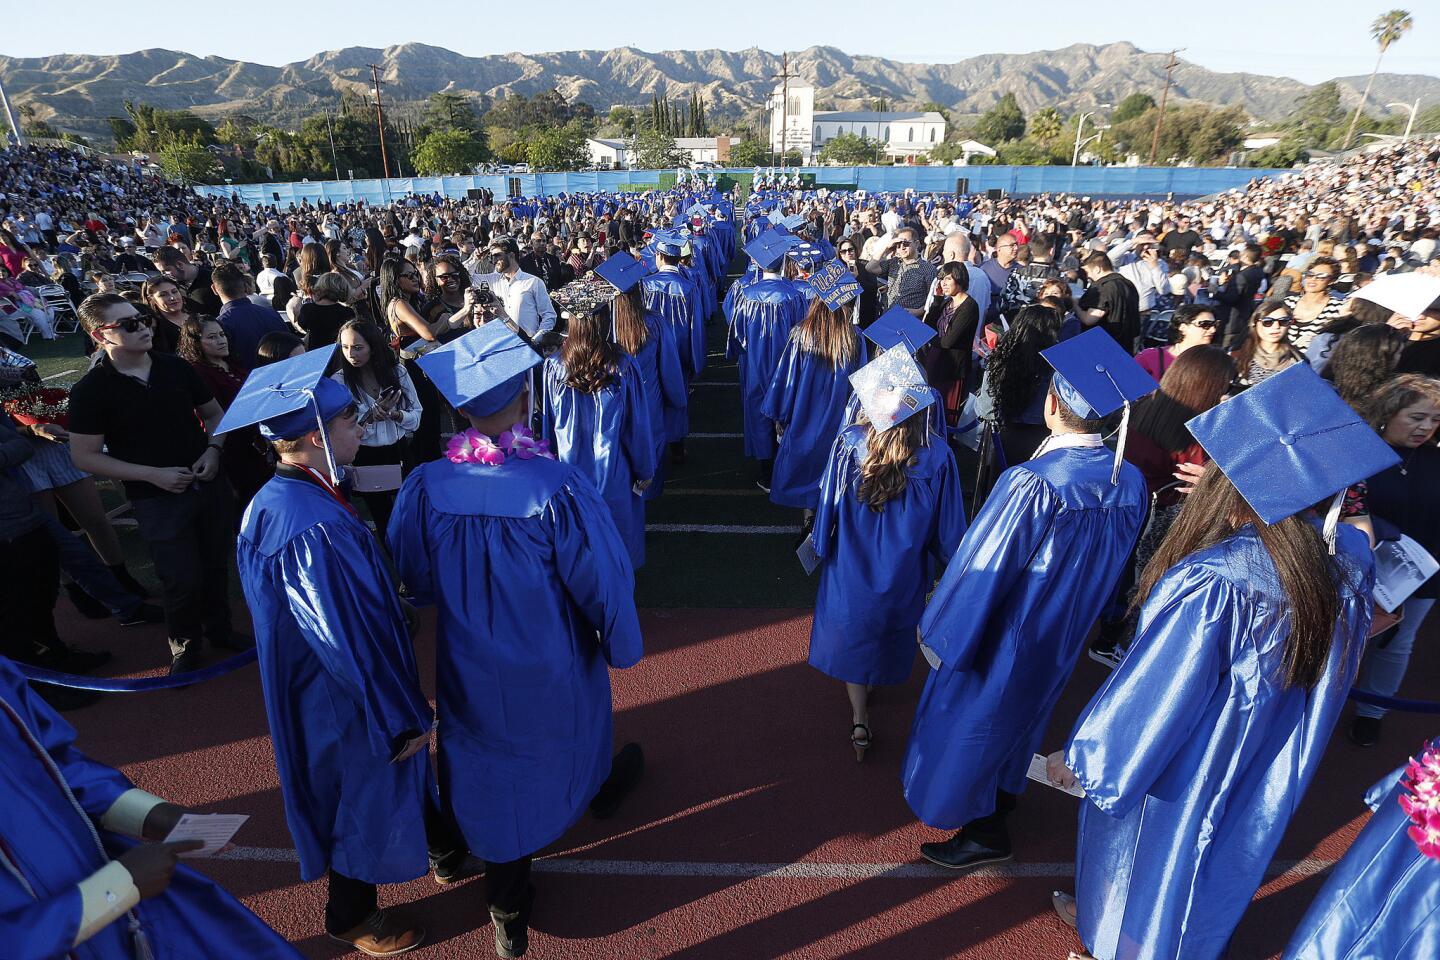 Burbank graduates file into the graduation bowl created on the football field at the graduation ceremony for Burbank High School in Burbank on Friday, May 24, 2019.